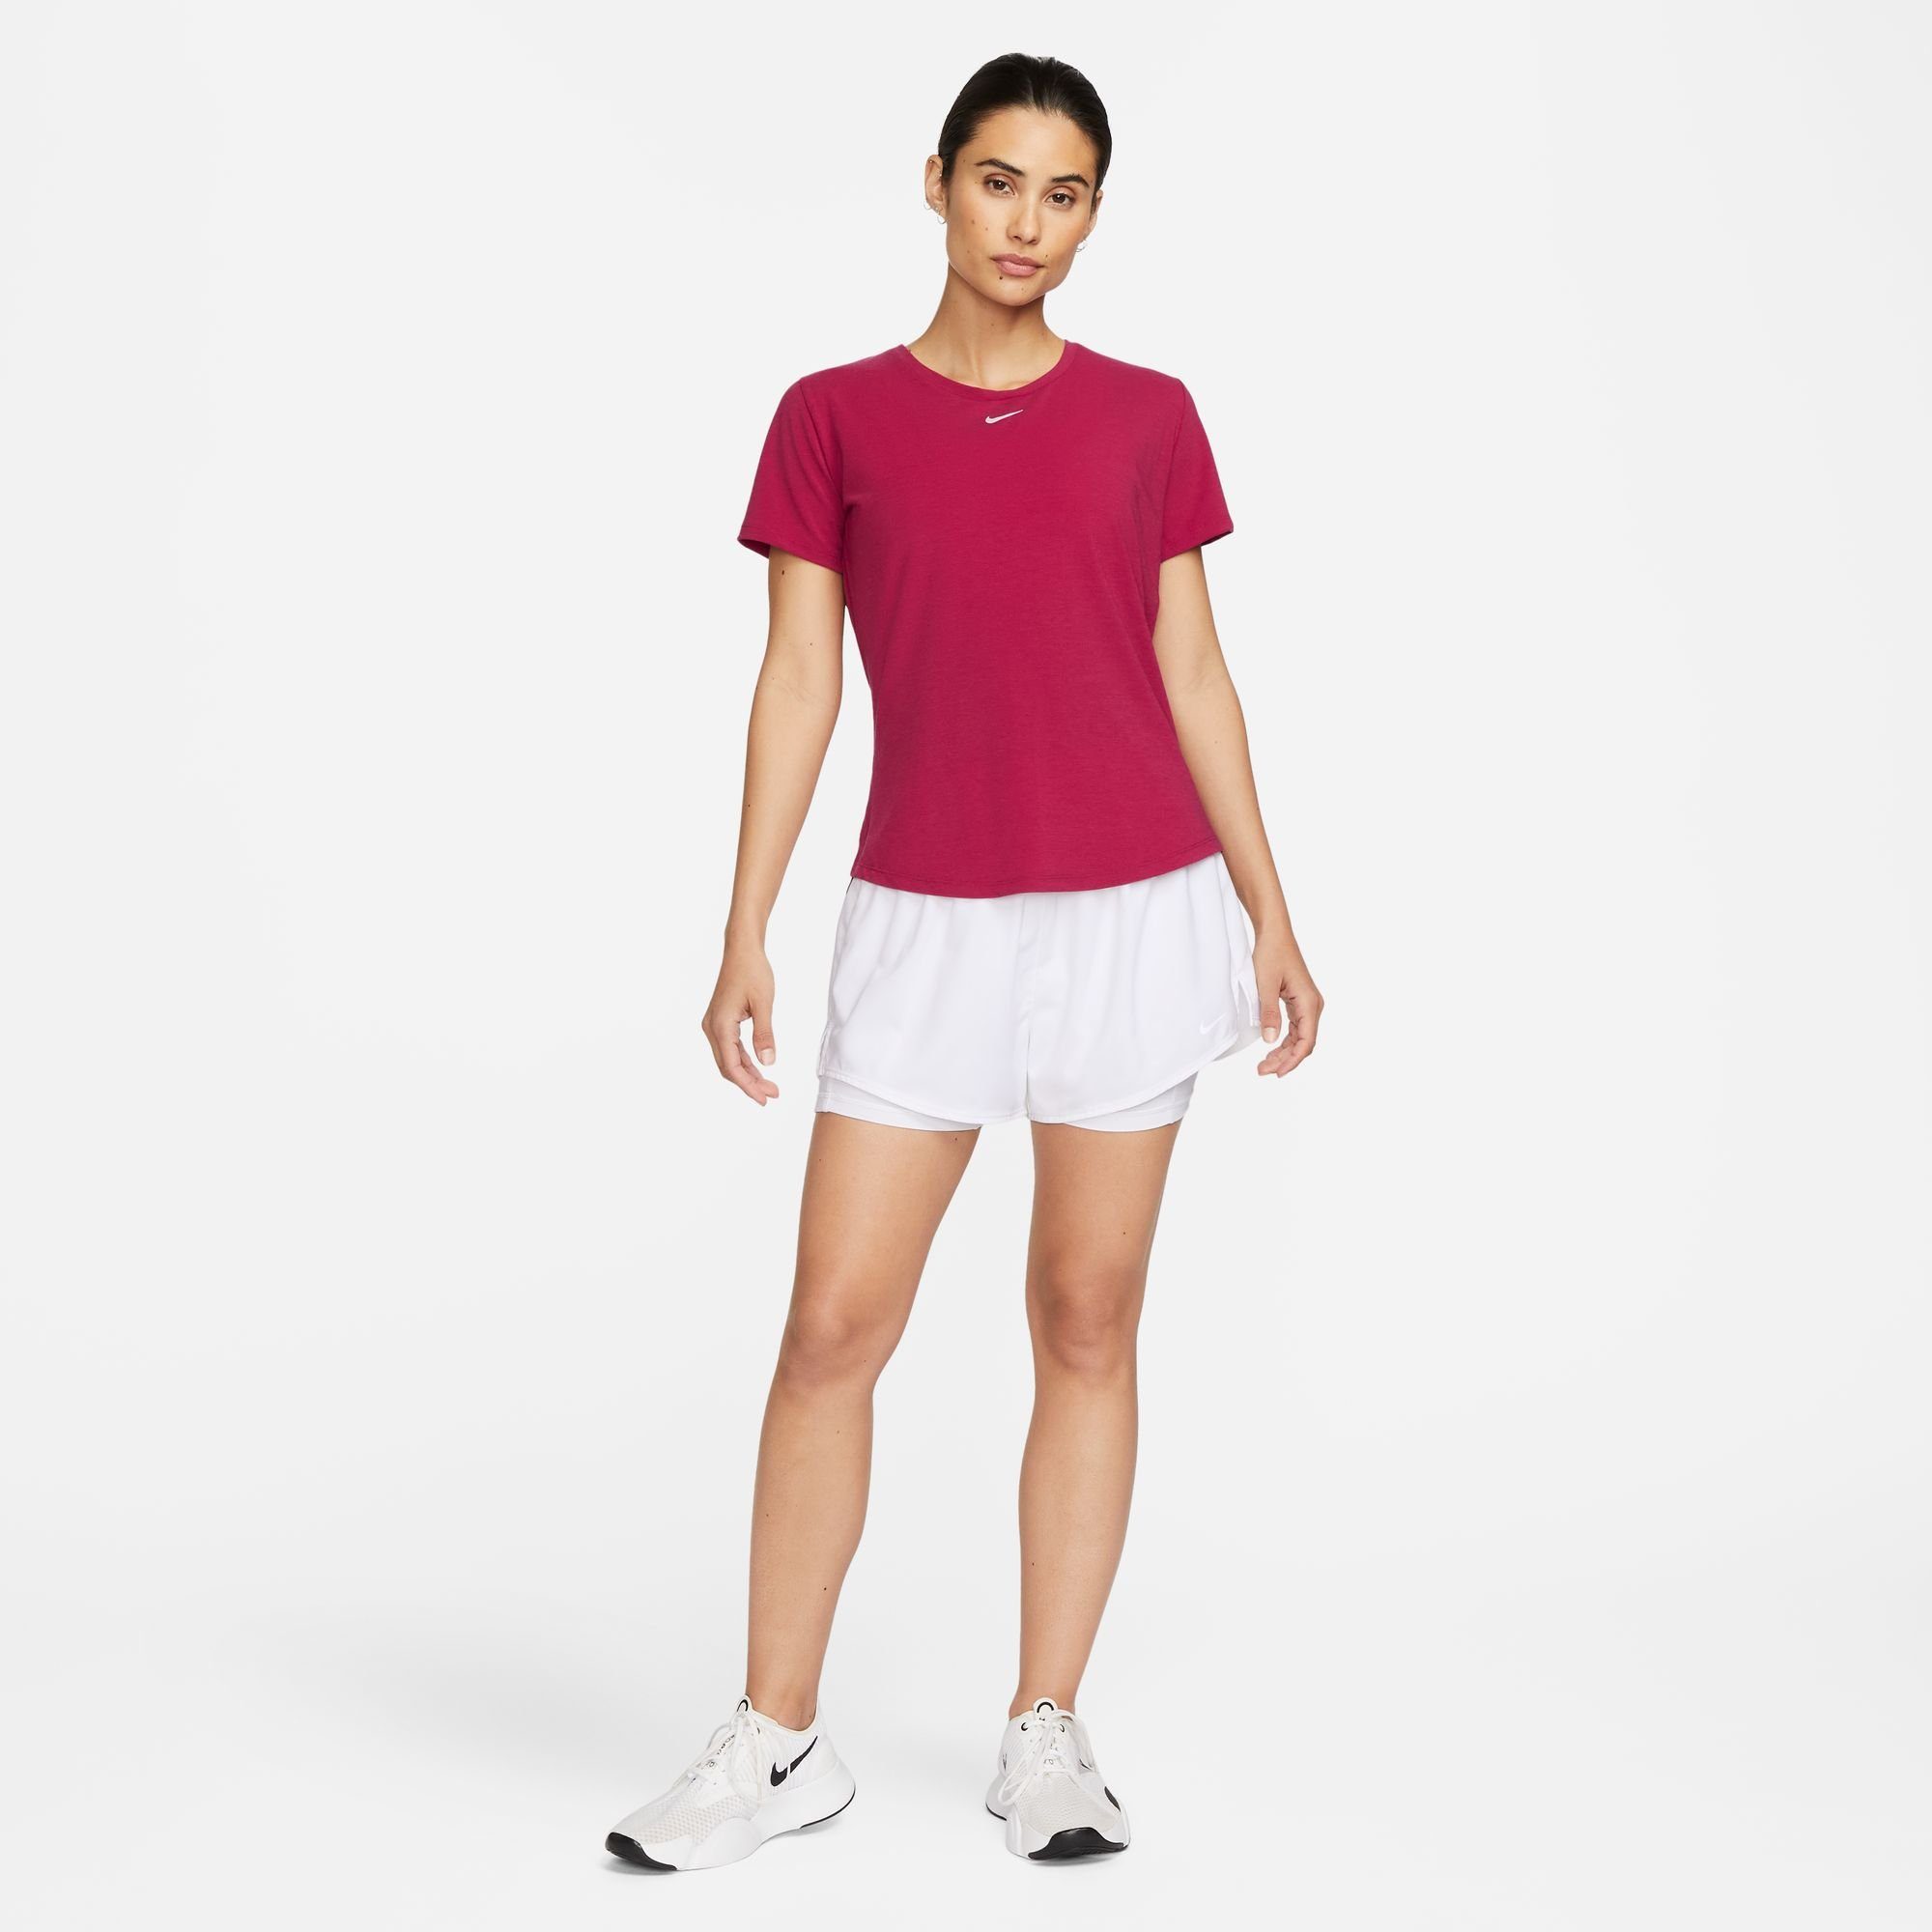 SHORT-SLEEVE LUXE SILV RED/REFLECTIVE TOP NOBLE UV FIT STANDARD ONE DRI-FIT WOMEN'S Nike Trainingsshirt